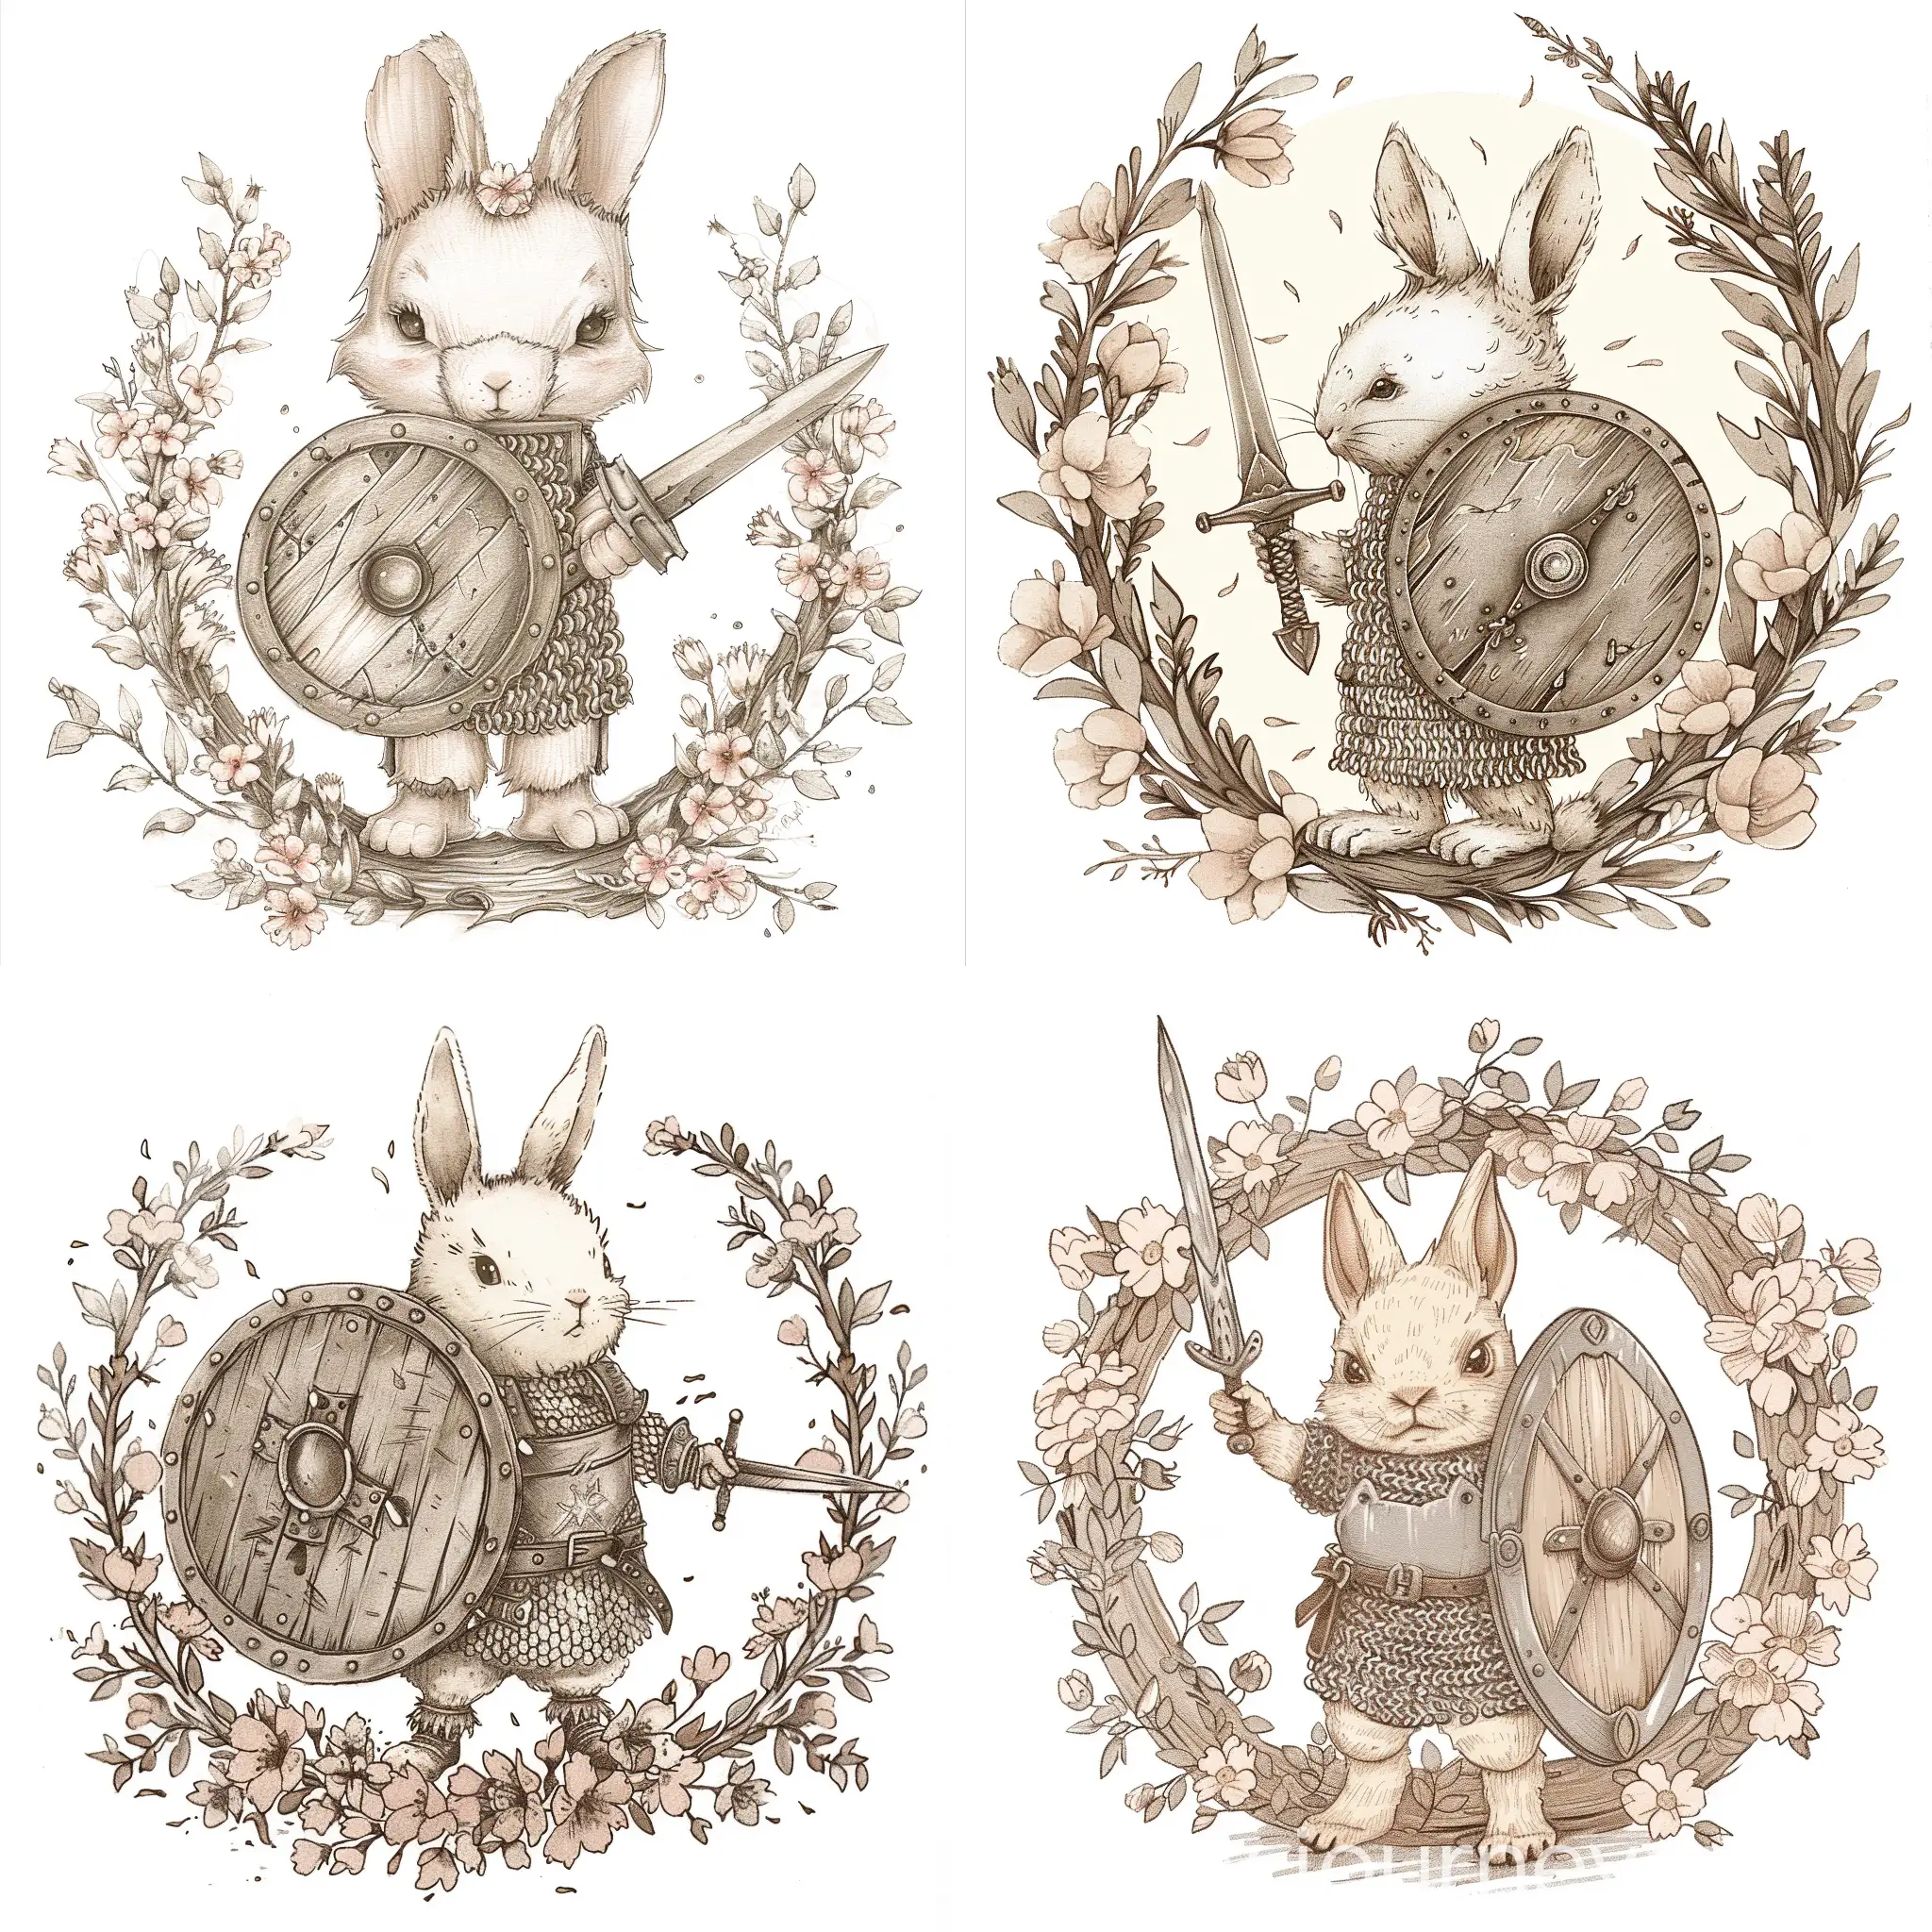 Create an hand drawn sketch of an anthropomorphic, cream-colored cute small bunny standing upright wearing medieval chainmail armor, holding a weathered wooden shield with metal trim in its left paw and a medieval sword in its right paw. The bunny is surrounded by a wreath of soft pink flowers with dense foliage. on strak white background